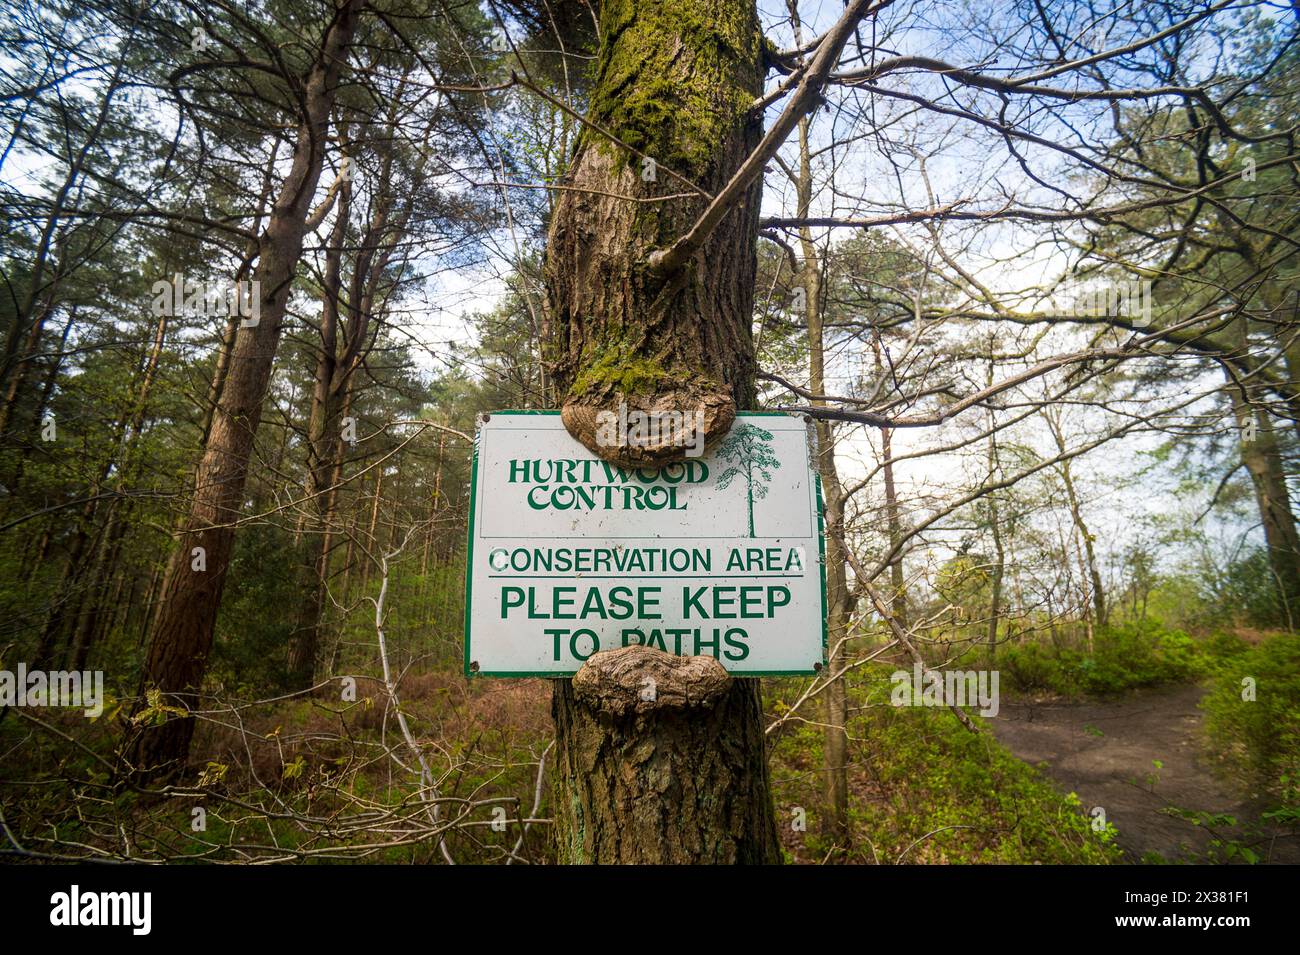 Conservation Area sign, Please keep to paths. Hurtwood Control. Surrey, UK Stock Photo